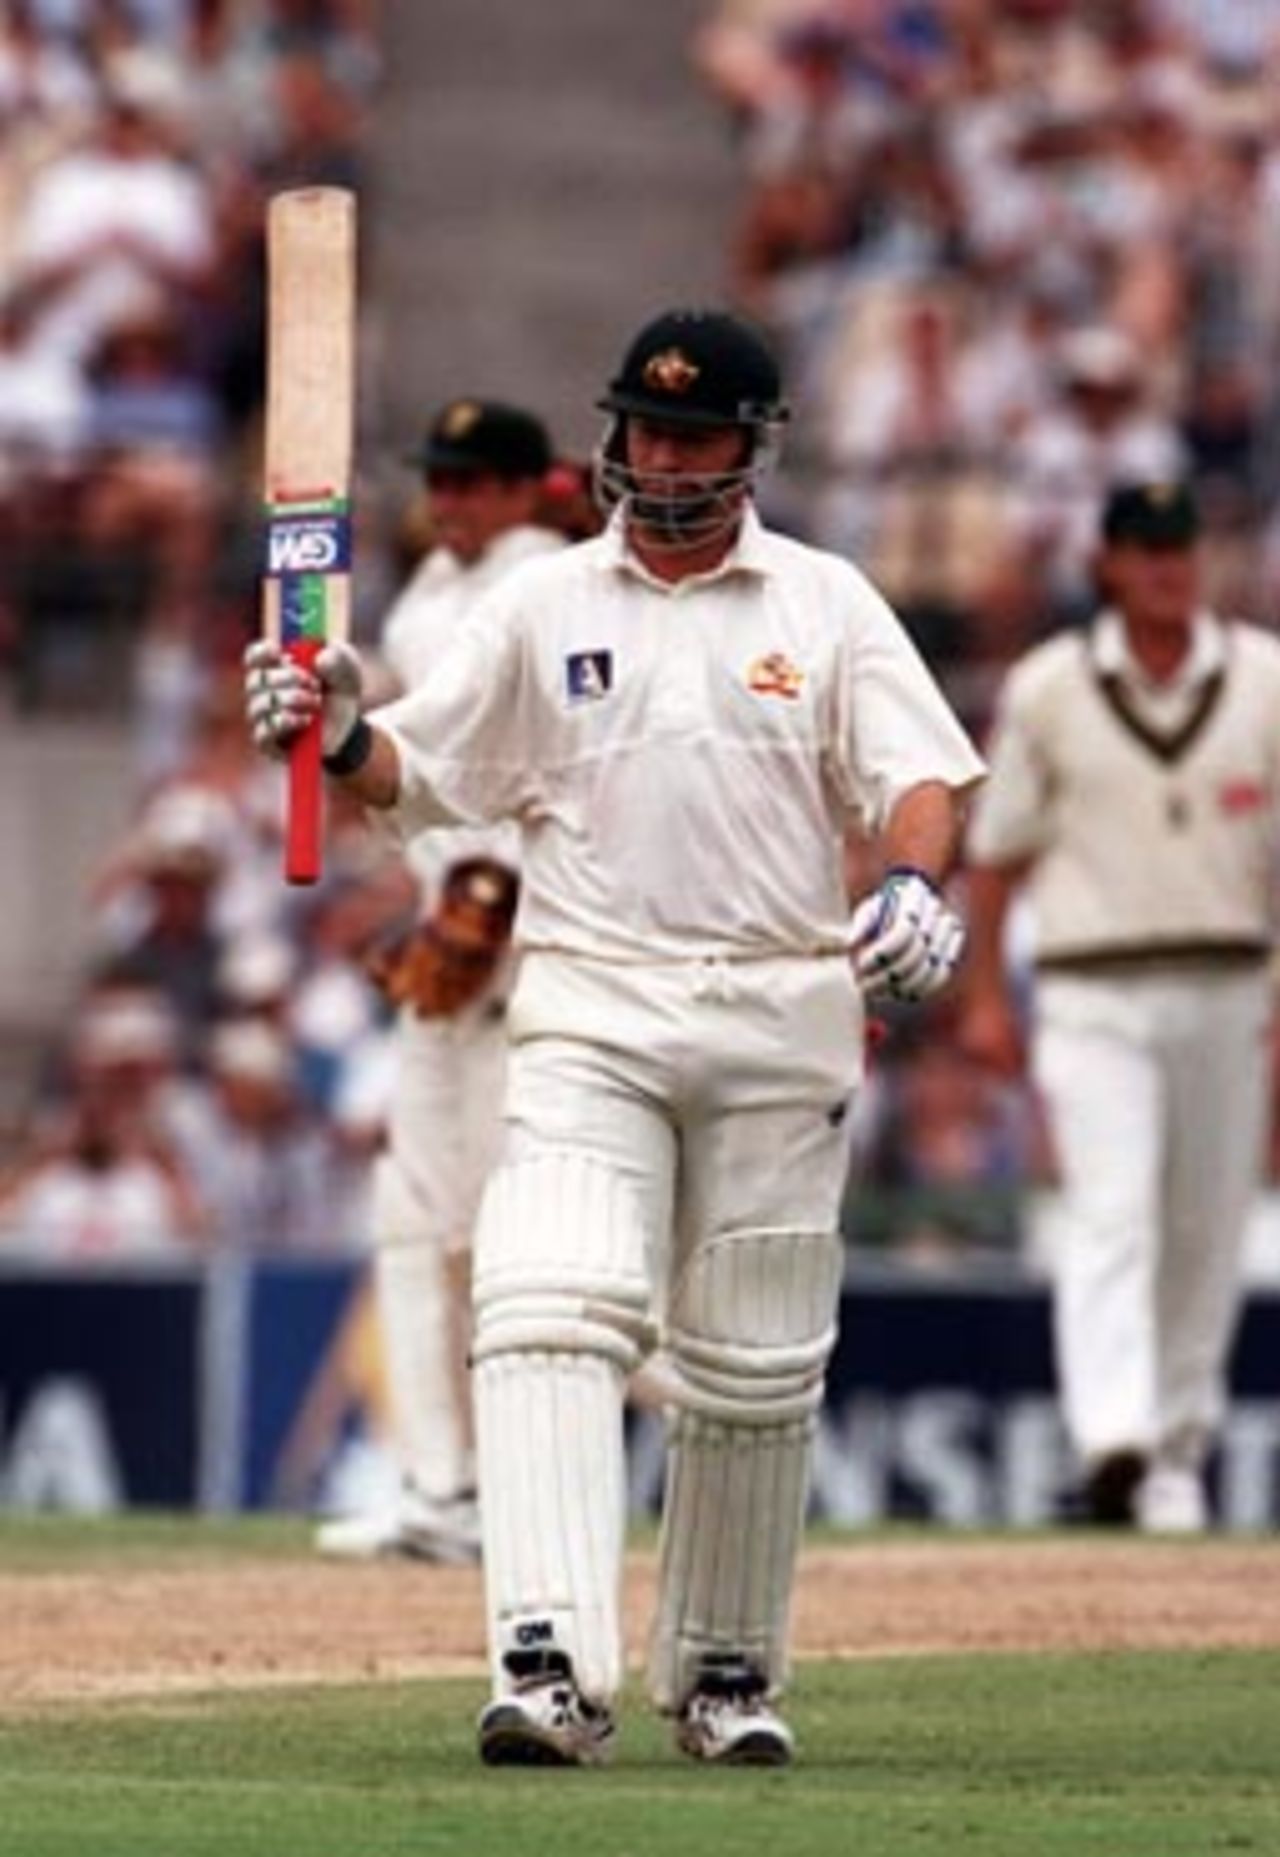 Steve Waugh raises his bat on reaching 50 in his 100th Test ..Australia v South Africa, 2nd Test Day 3 at the SCG, Sunday January 4th 1998.